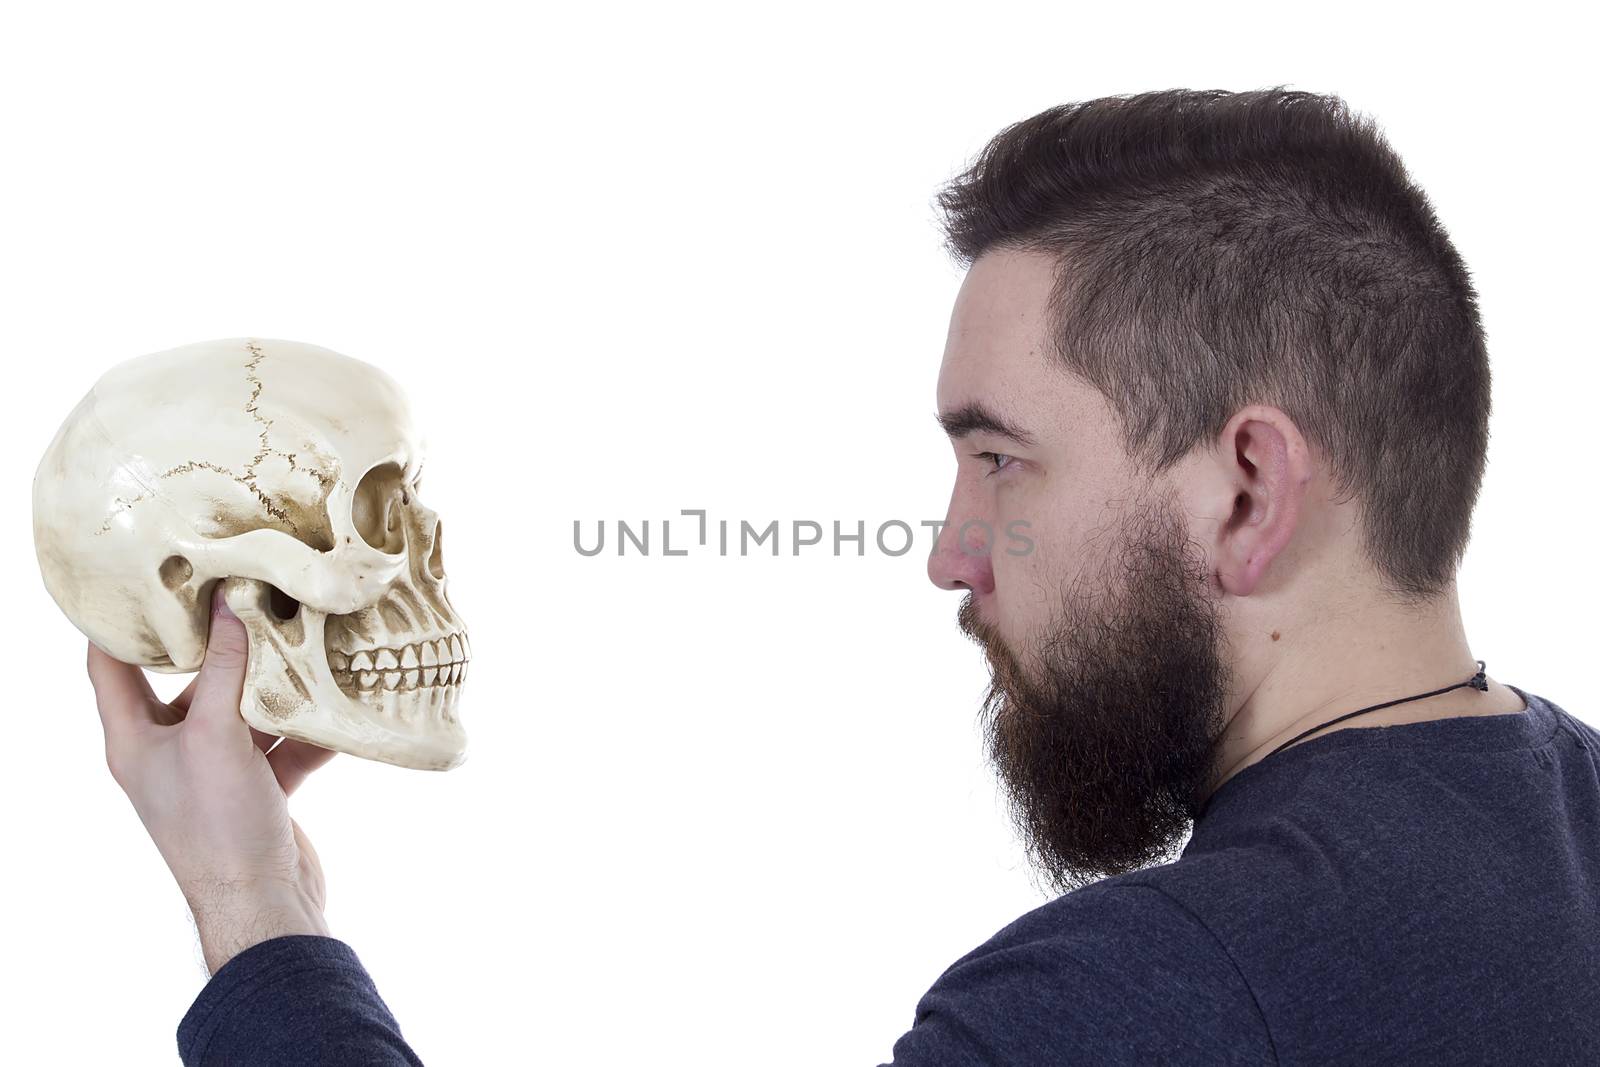 Bearded man with a human skull in his hand